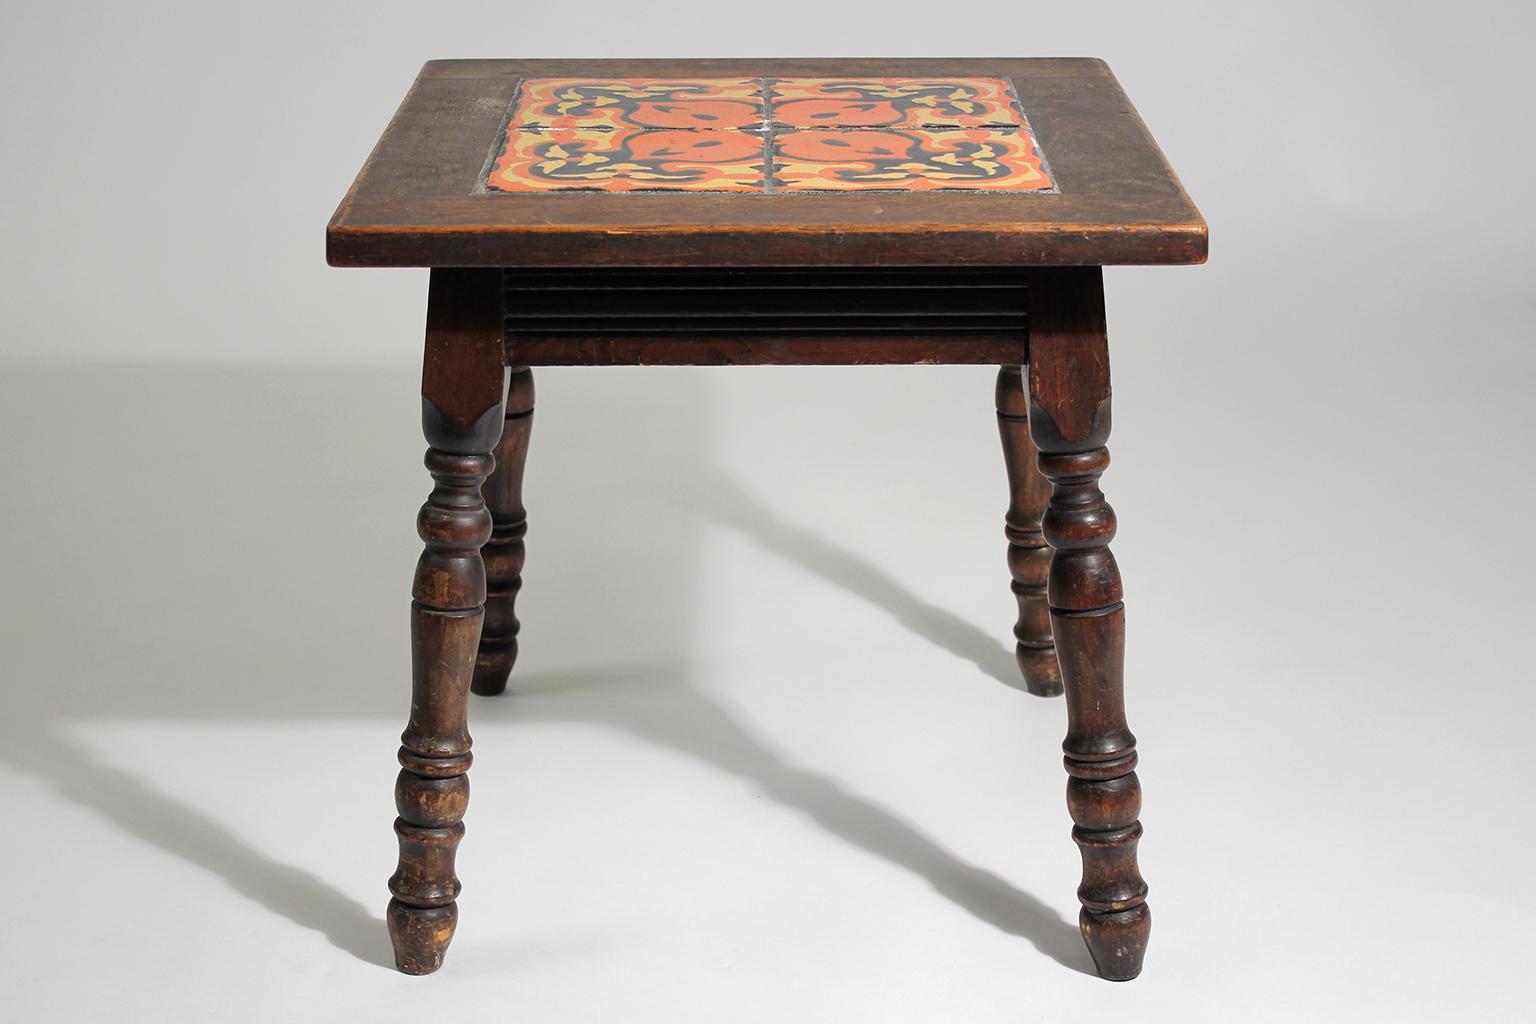 Beautiful original antique California Mission Taylor Malibu wood and tile top table dating from the 1920s. Has 4 beautiful tiles inlaid into a wooden table. In nice original condition with great color.